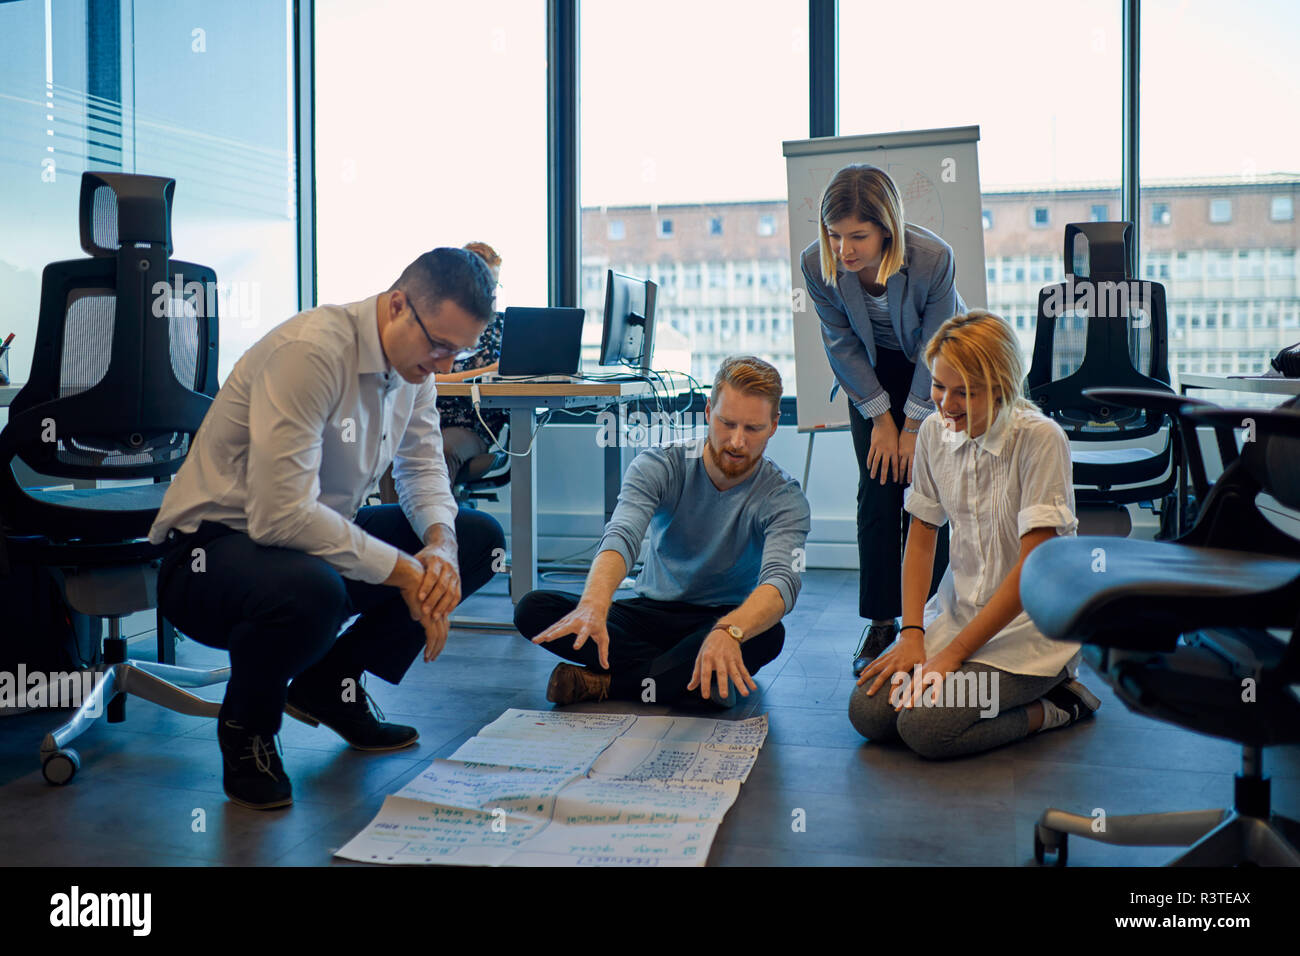 Business team brainstorming in office Stock Photo